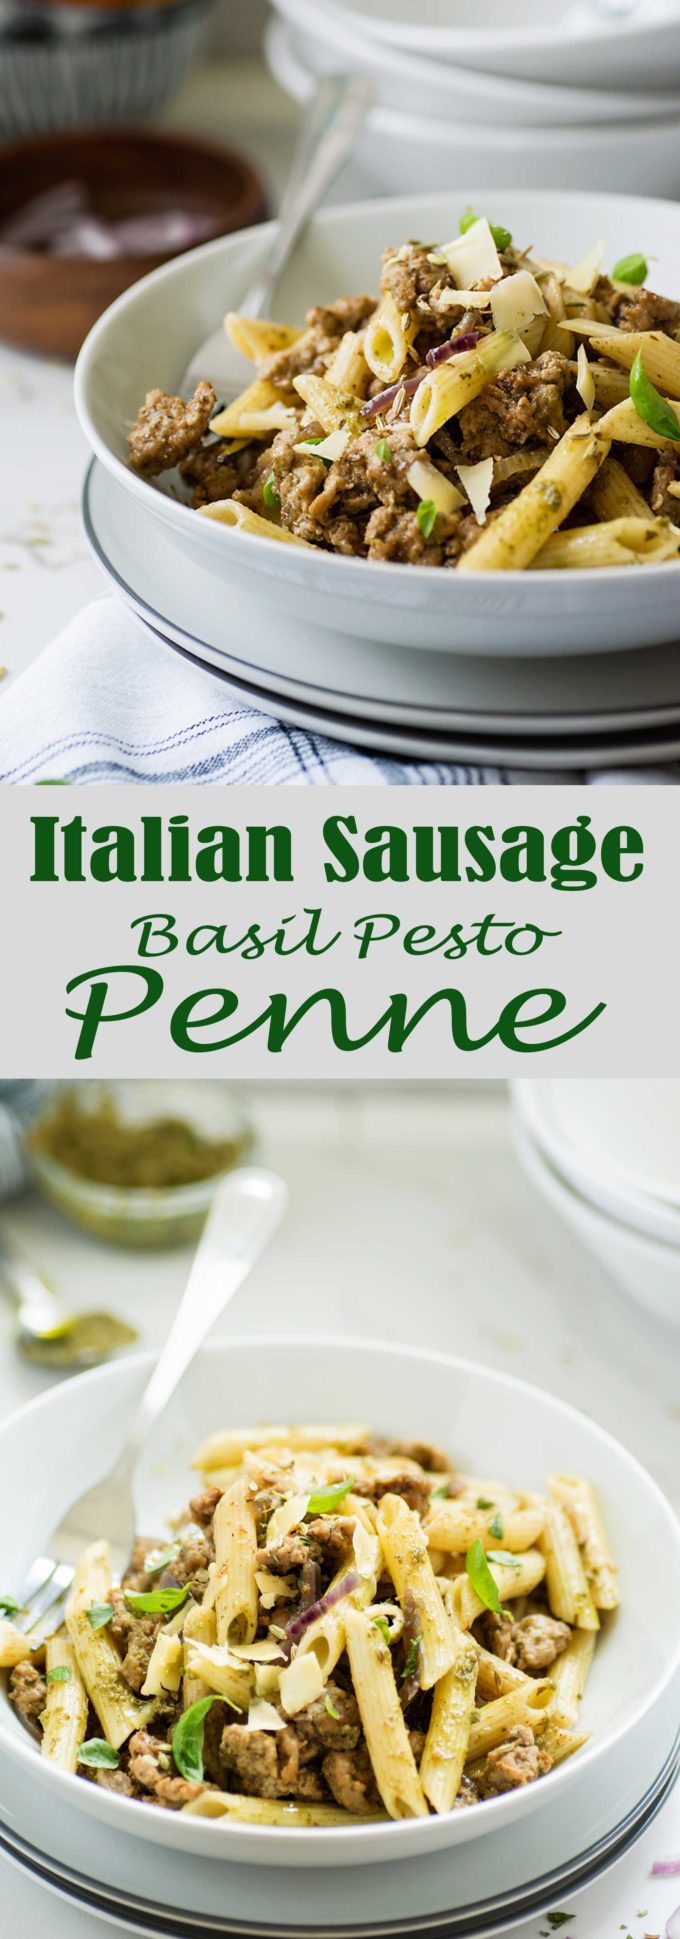 The quickest dinner with so much flavor Basil Pesto Penne with Italian Sausage pasta